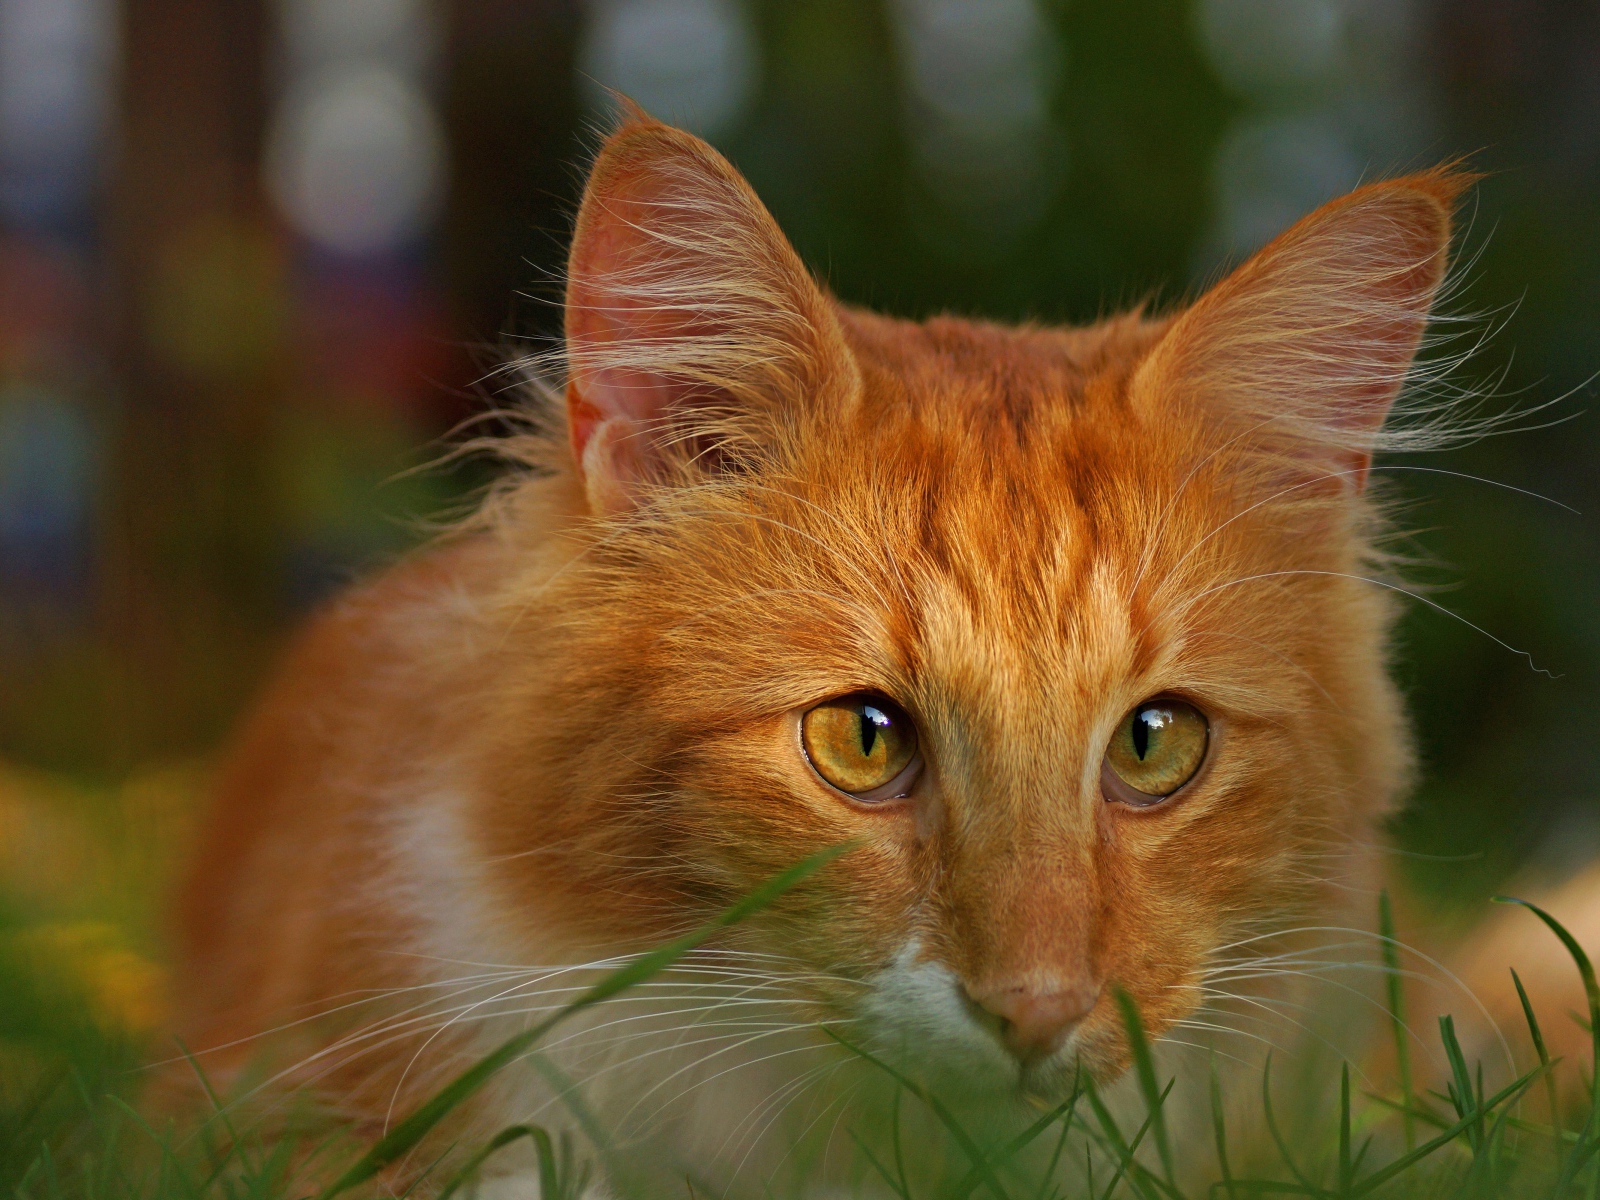 Red cat with funny eyes sits in the green grass.